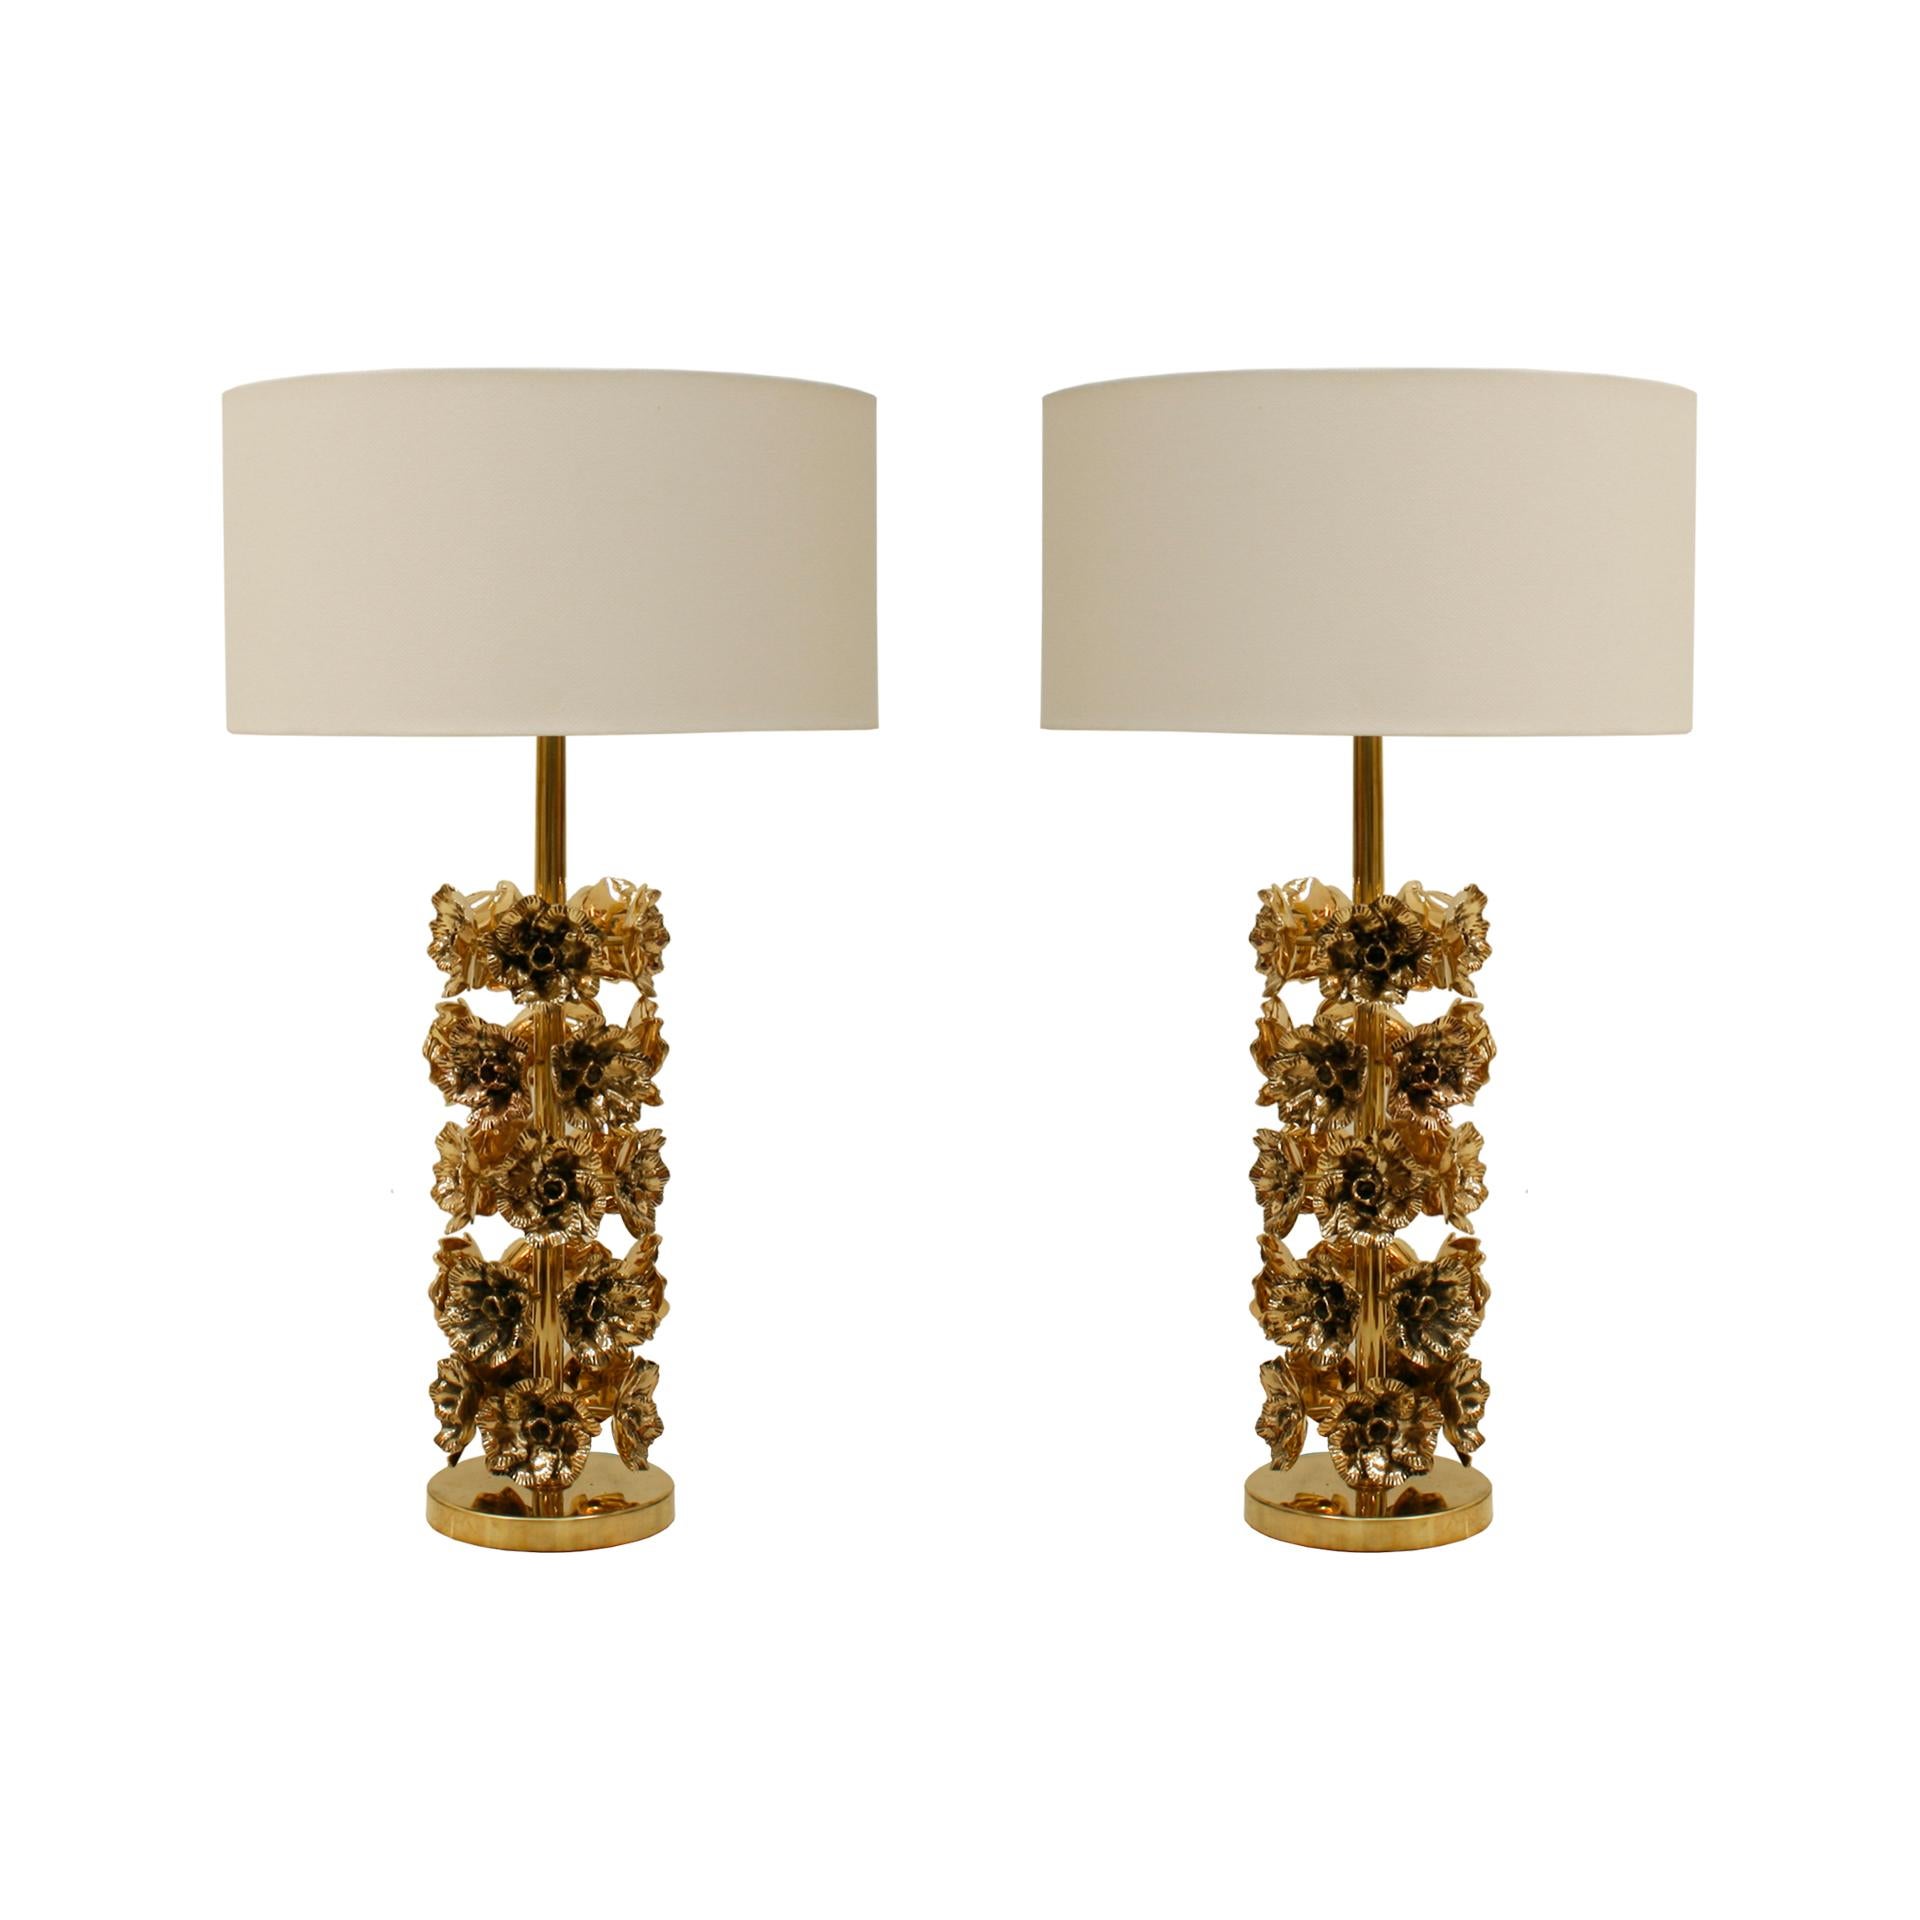 Pair of contemporary table lamps with brass structure and white cotton thread shades made in Italy.

Measurements: Diameter 20 x height 70 cm

Measurements with shade: Diameter 45 x height 88 cm.

Every item LA Studio offers is checked by our team